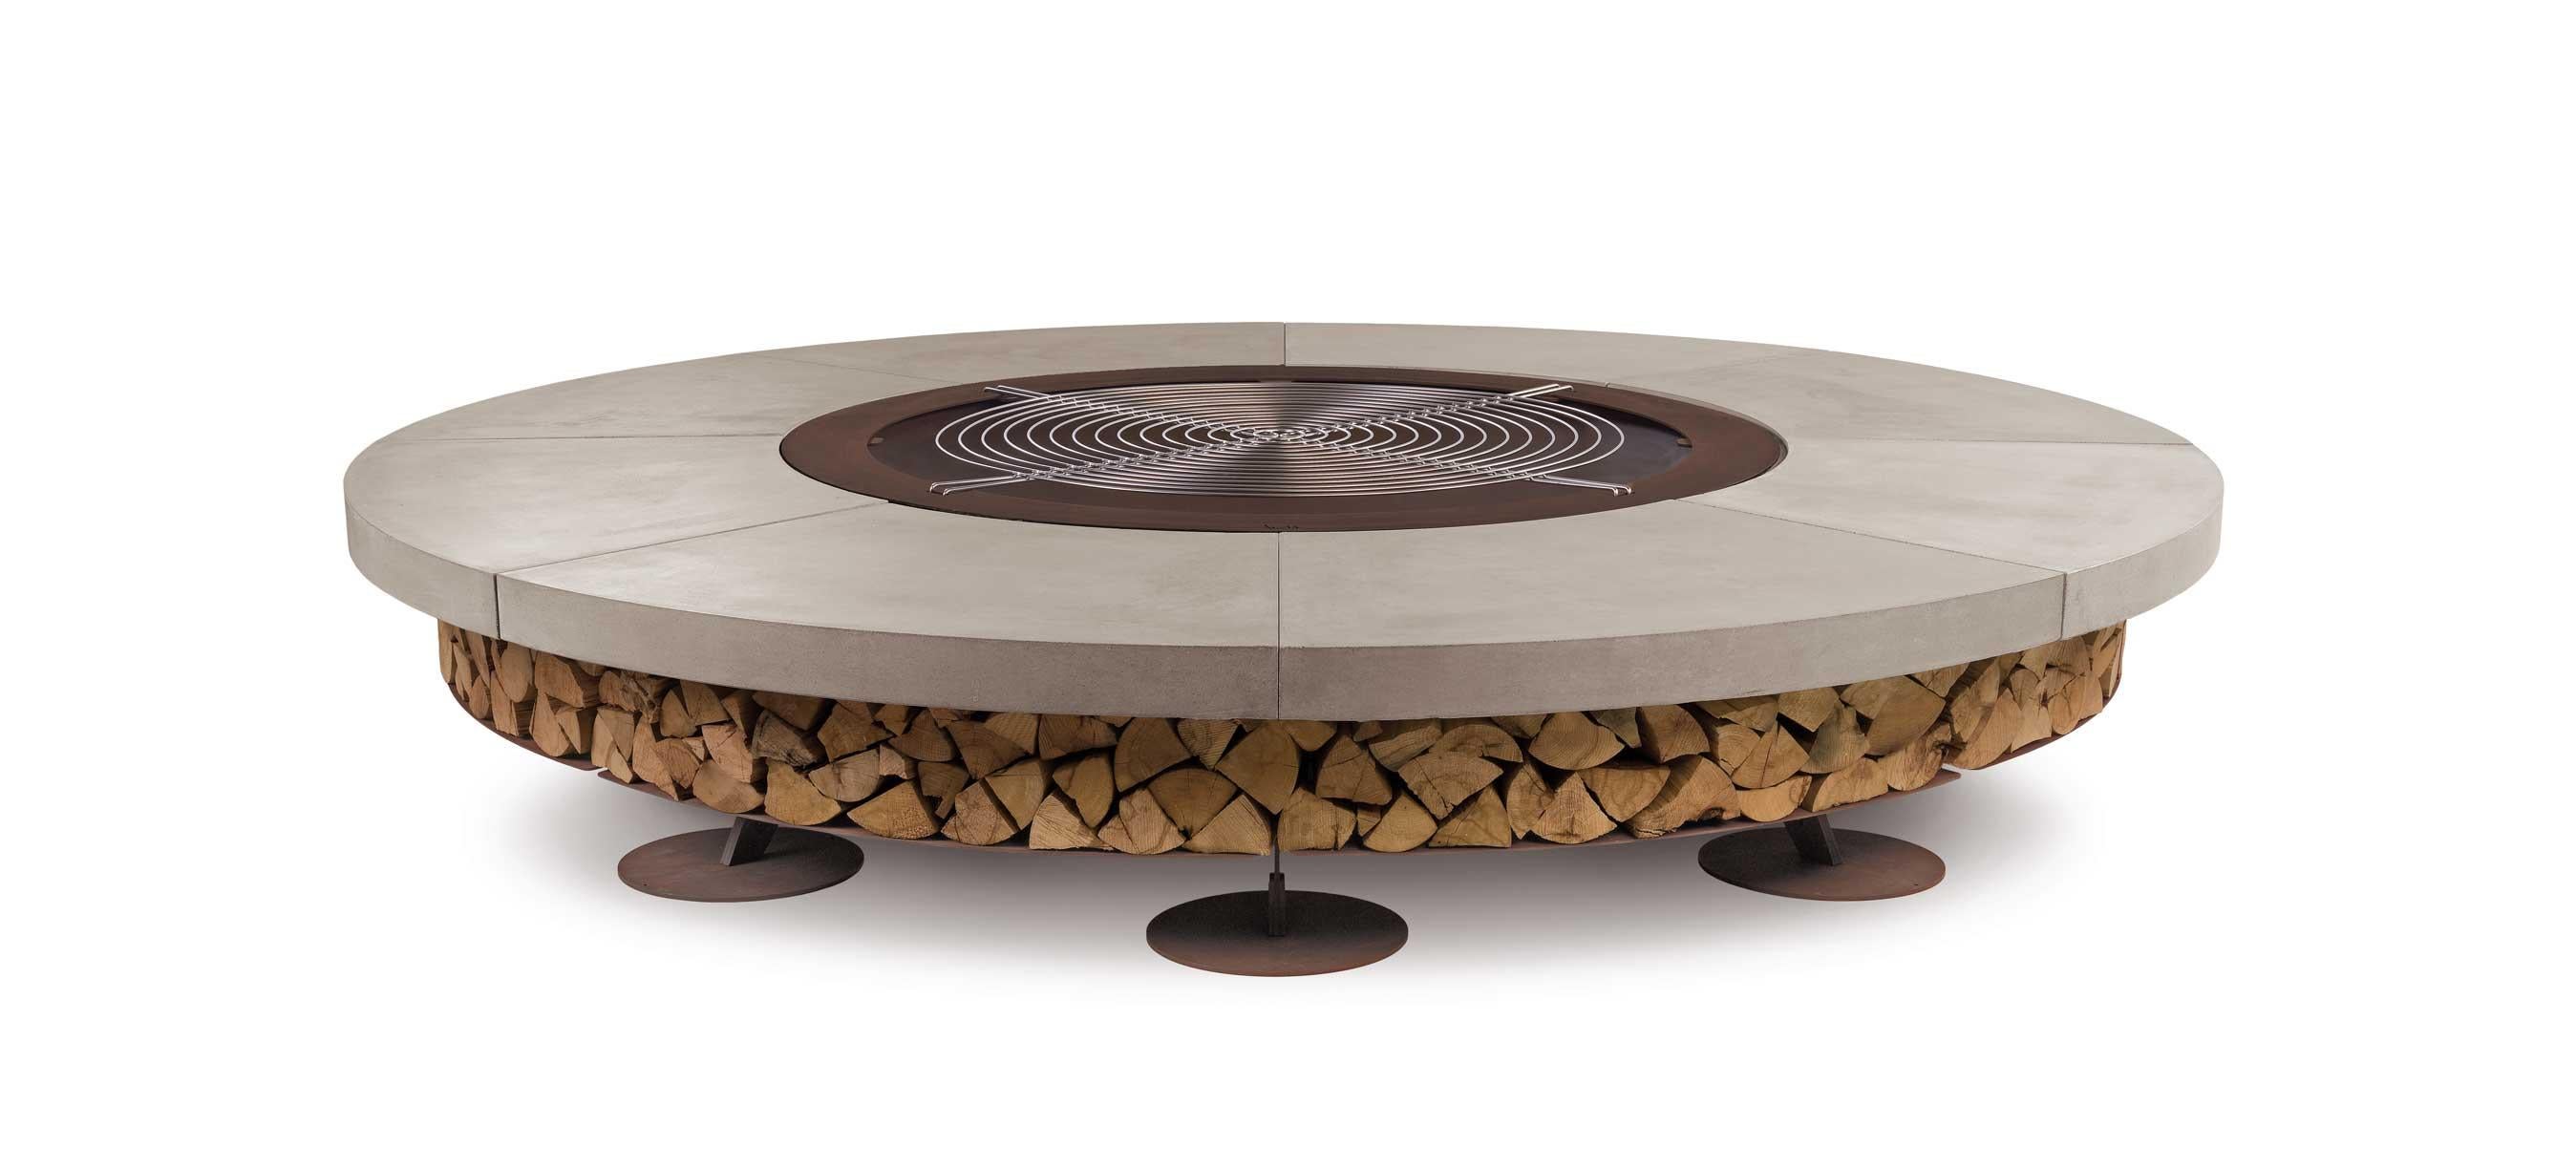 Ercole large fire pit by AK47 Design

Grey concrete fire pit Ø2500 mm.
Ercole is a outdoor wood-burning fire pit.
It is born by the union of two raw materials – the steel as a structural element and the concrete which decorates and enhances its